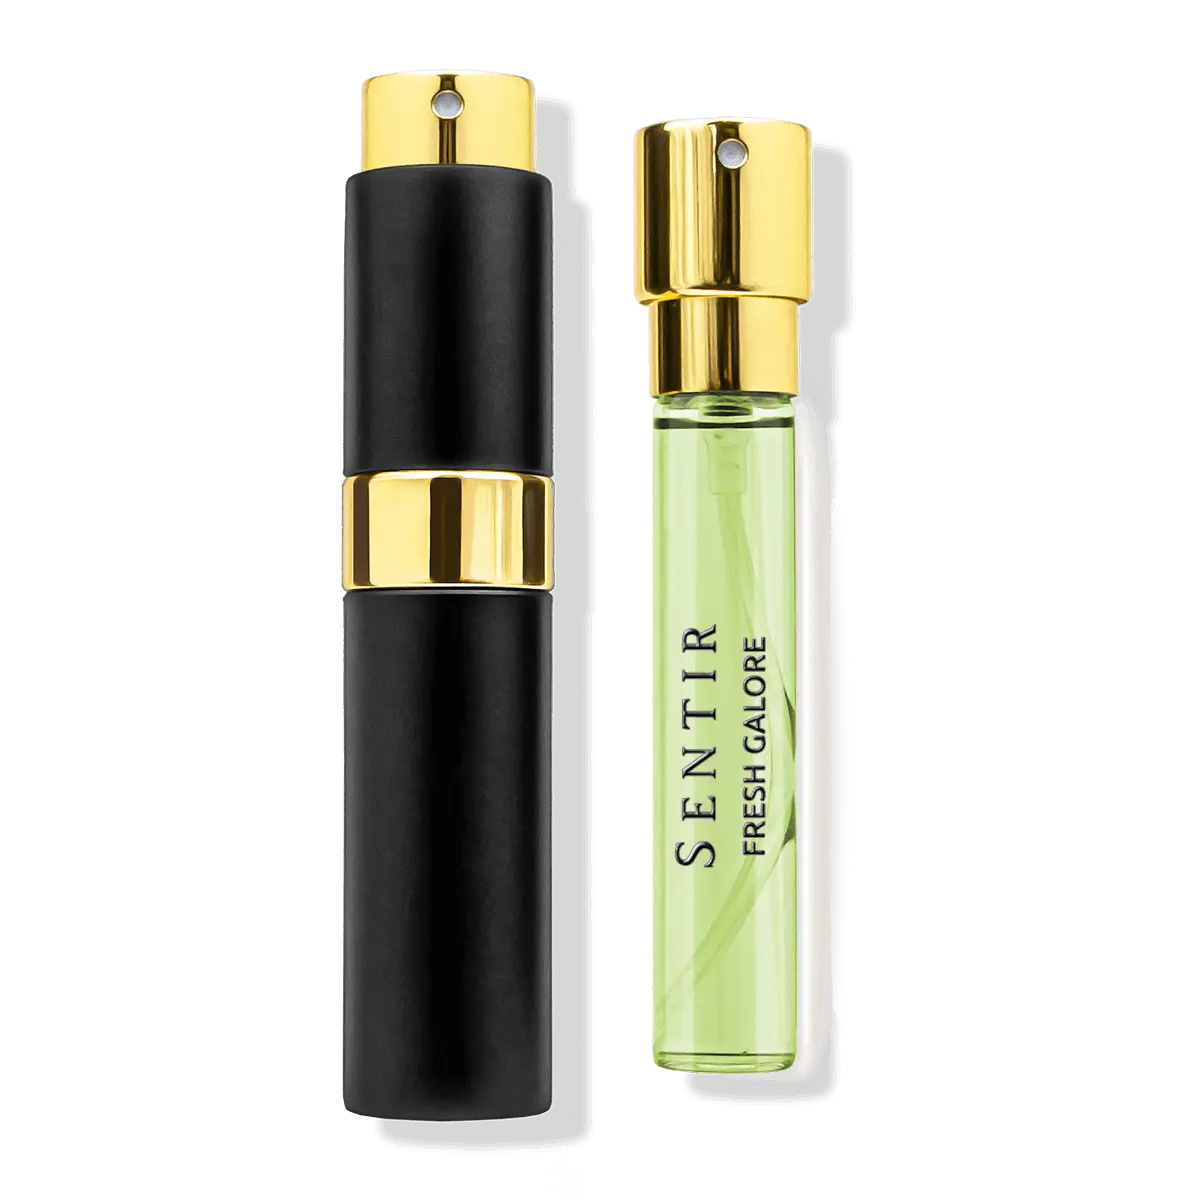 TOP 3 Dior Sauvage Dupes / Clones